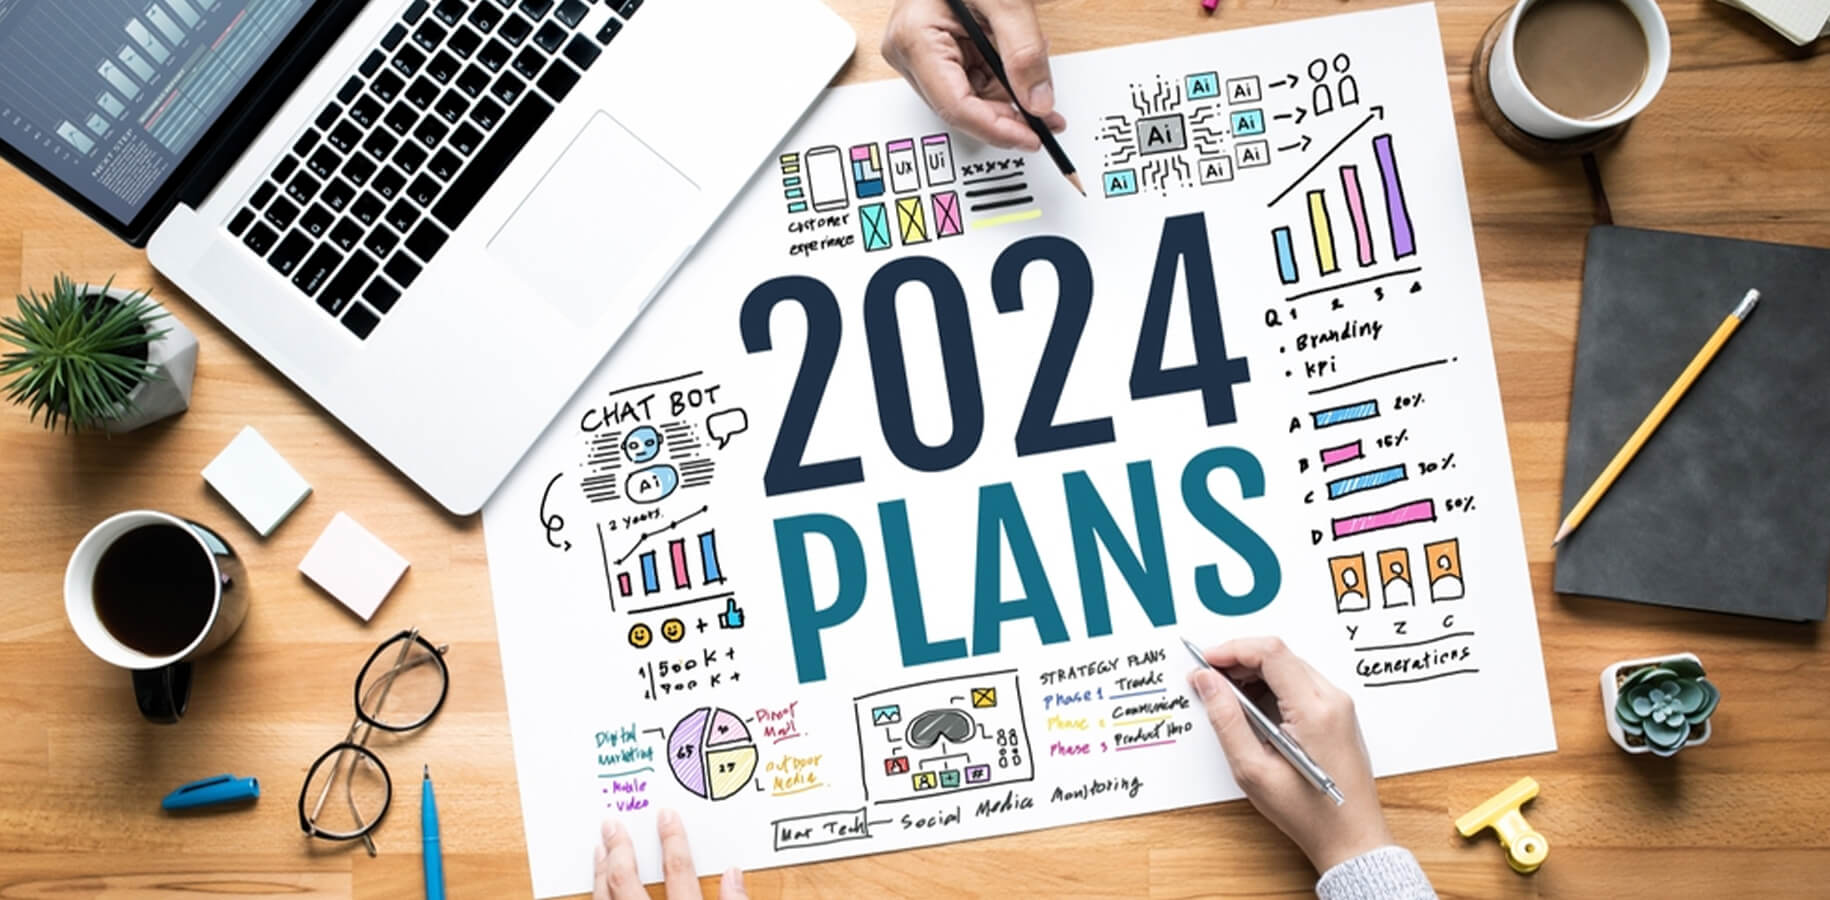 plan-for-2024-image